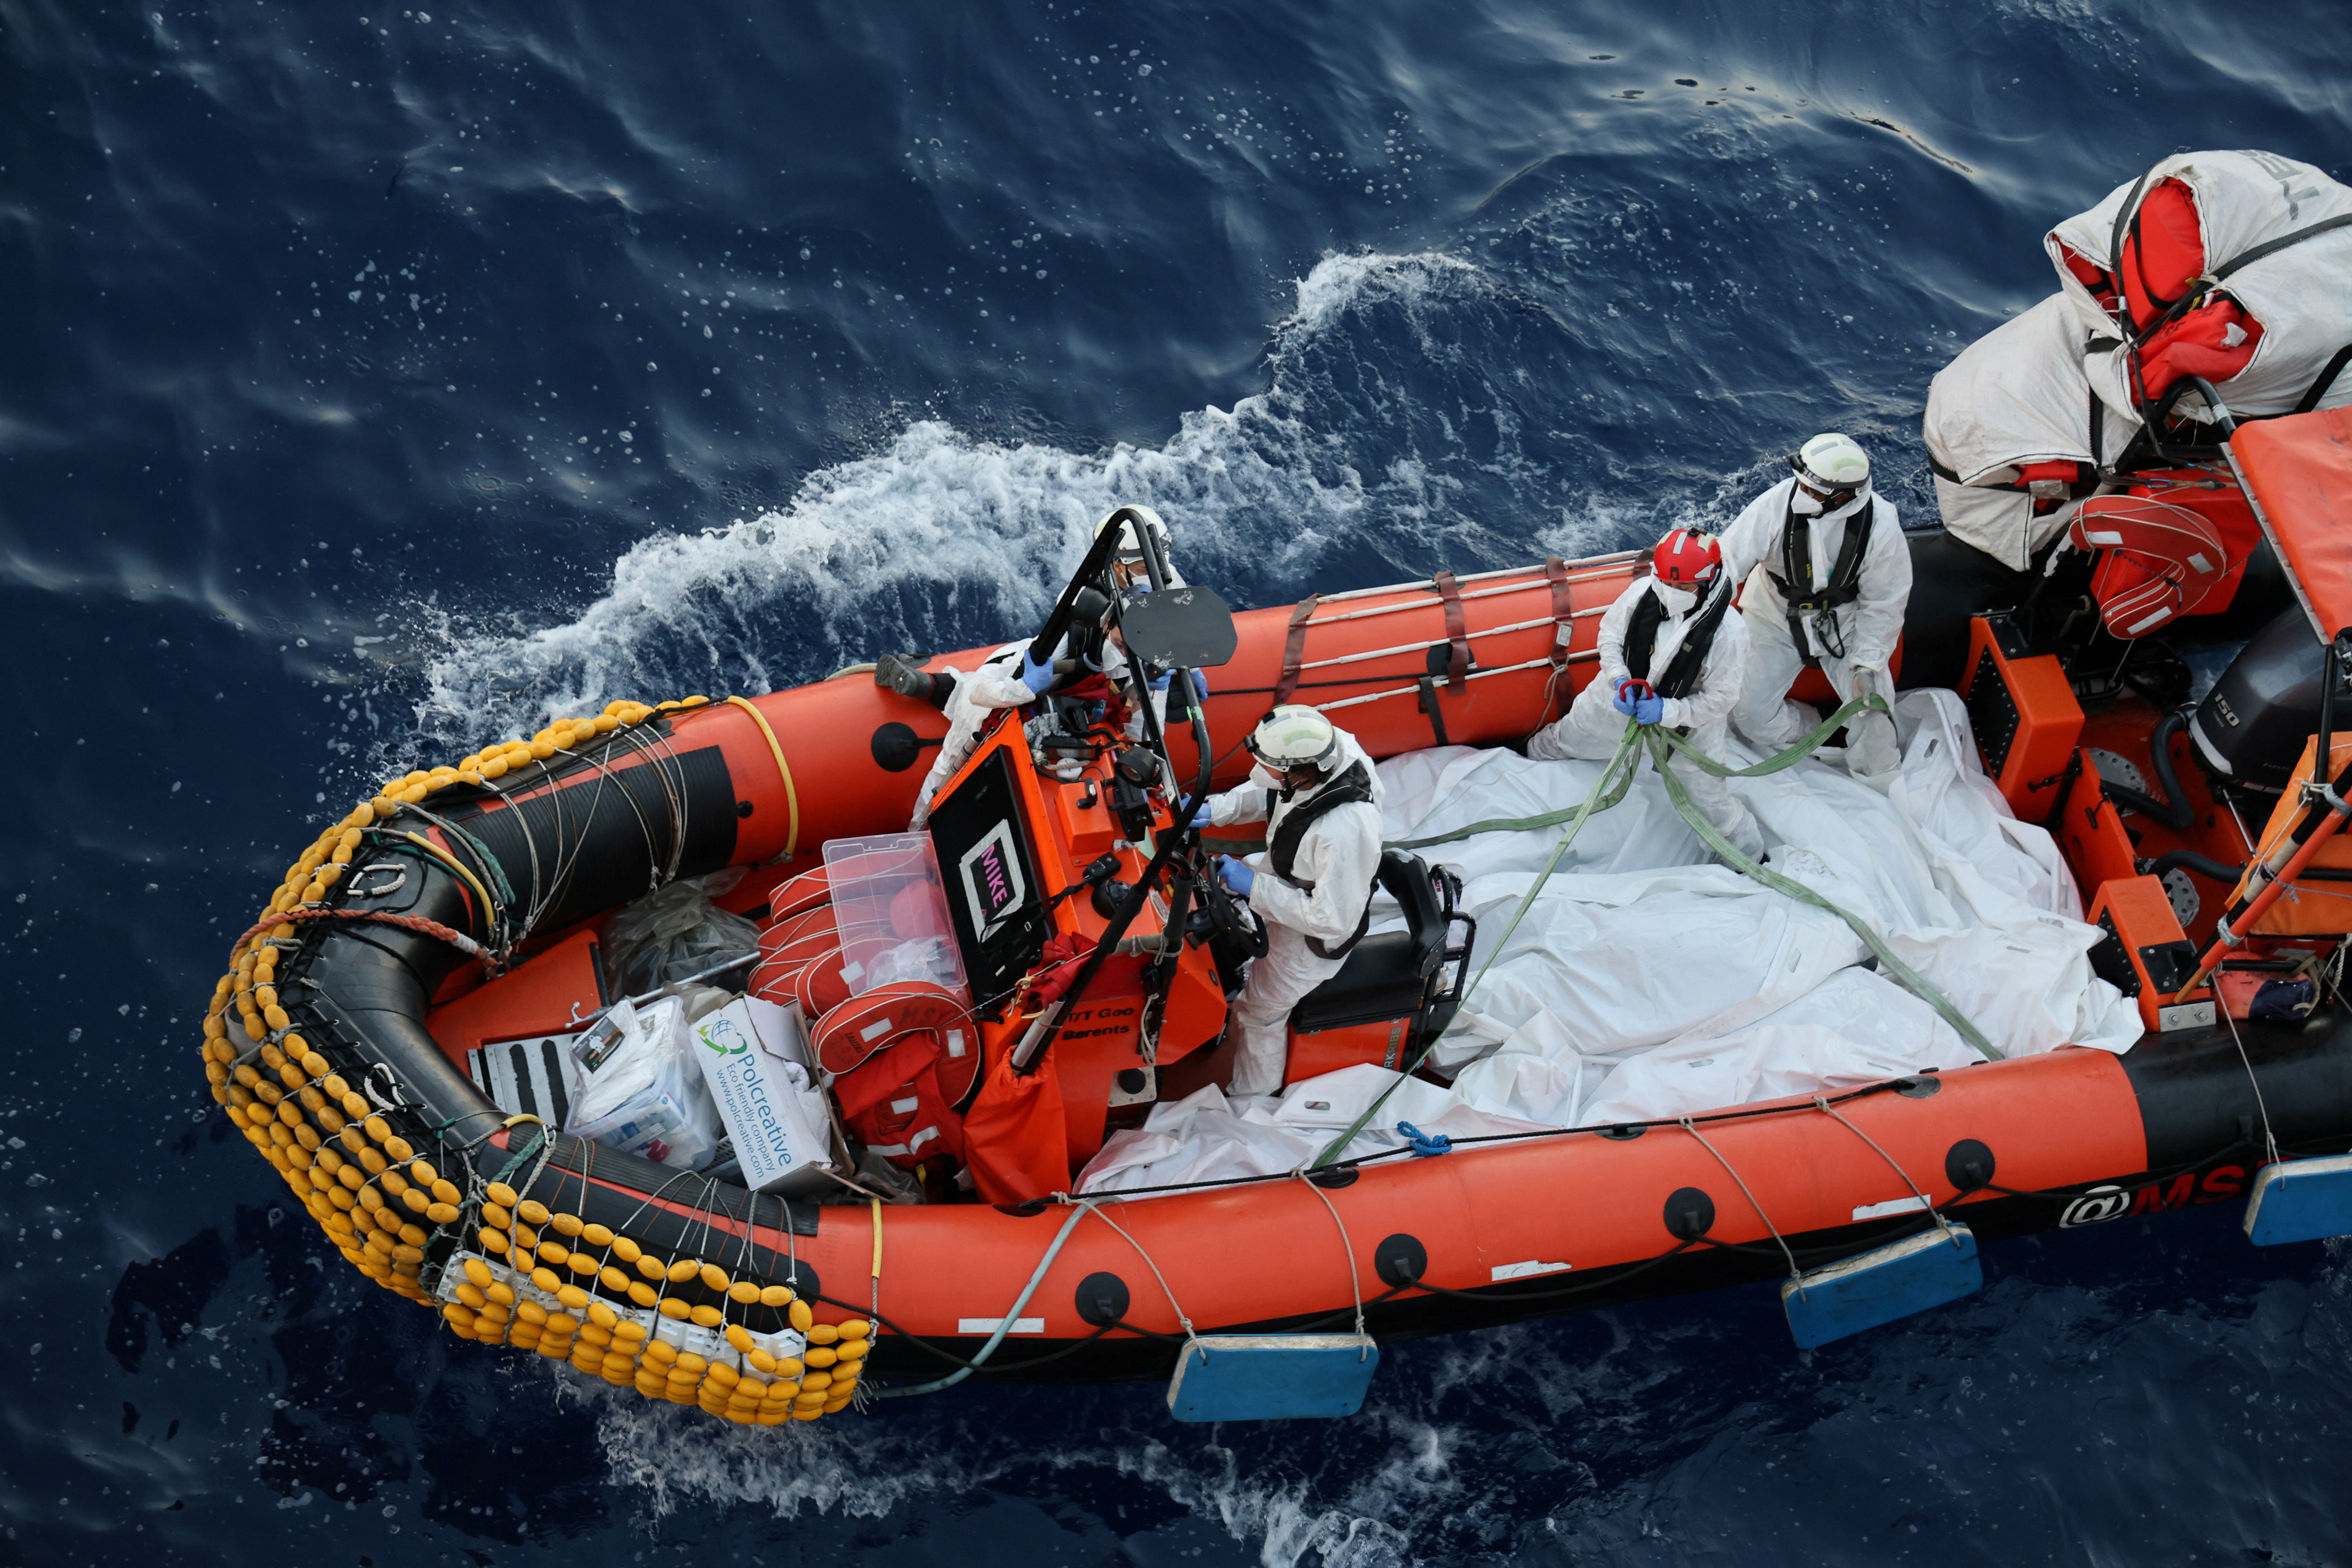 Handout image shows body bags of migrants retrived from the Mediterranean sea